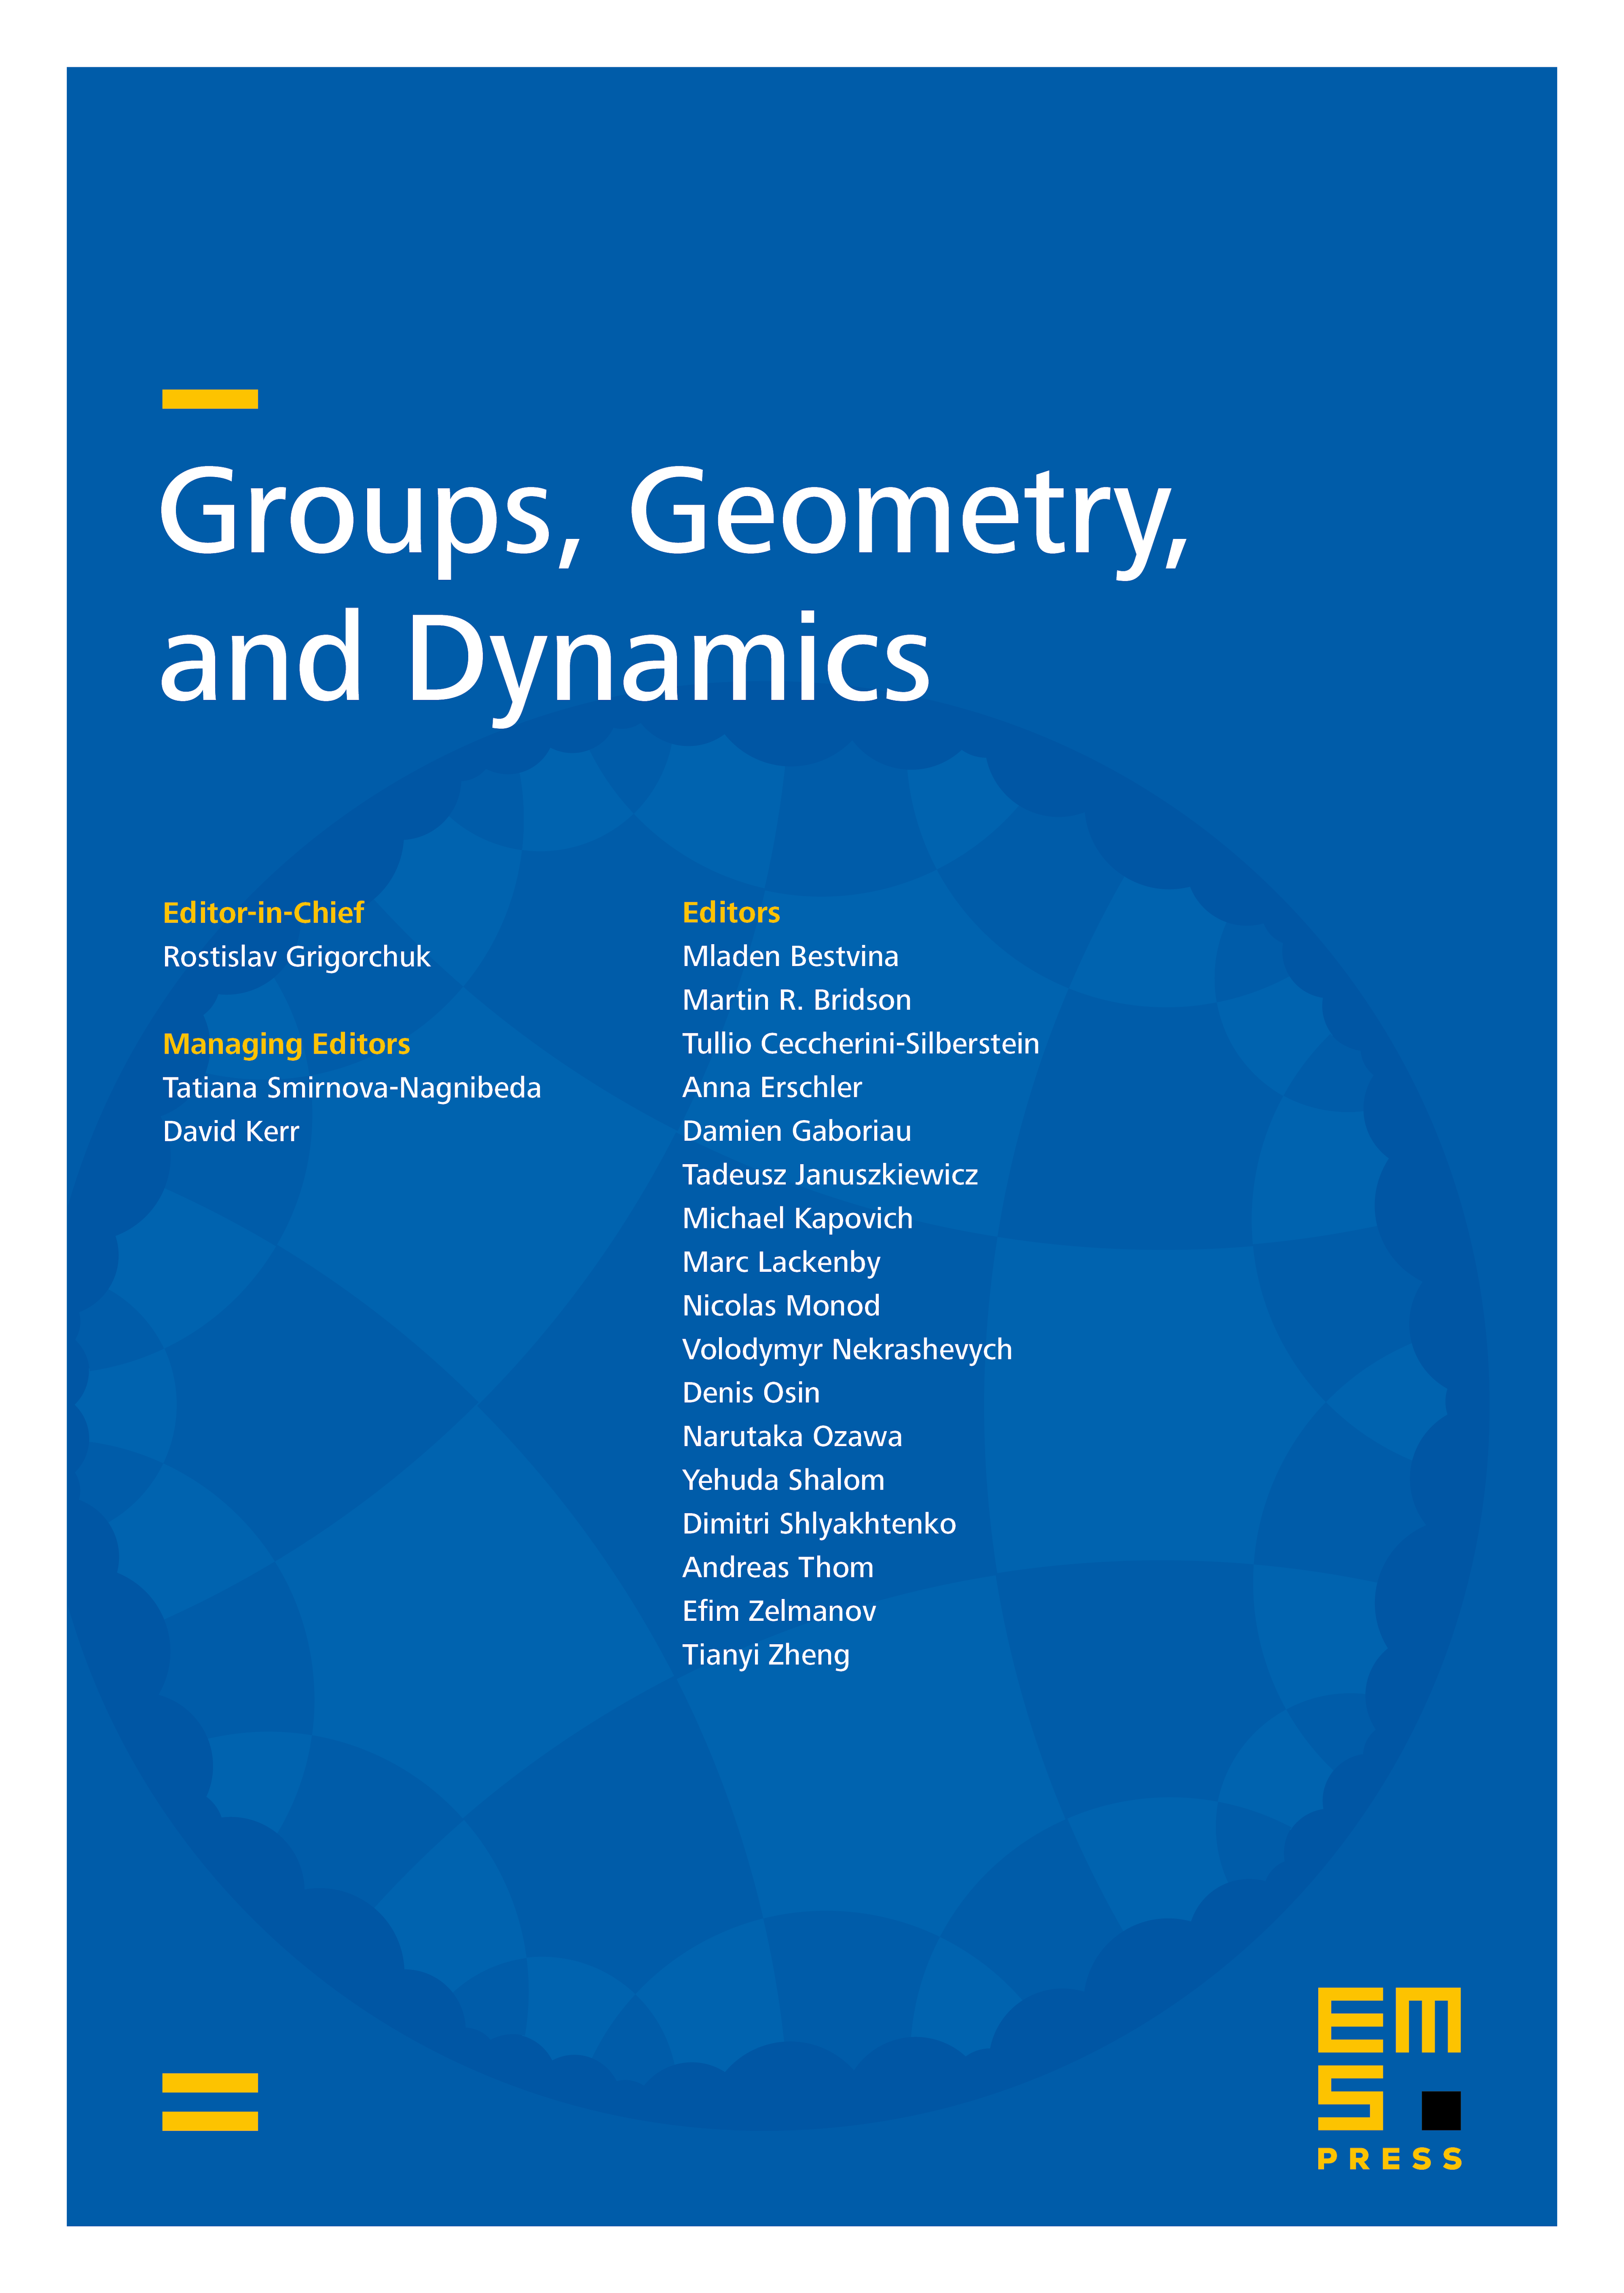 Representing interpolated free group factors as group factors cover